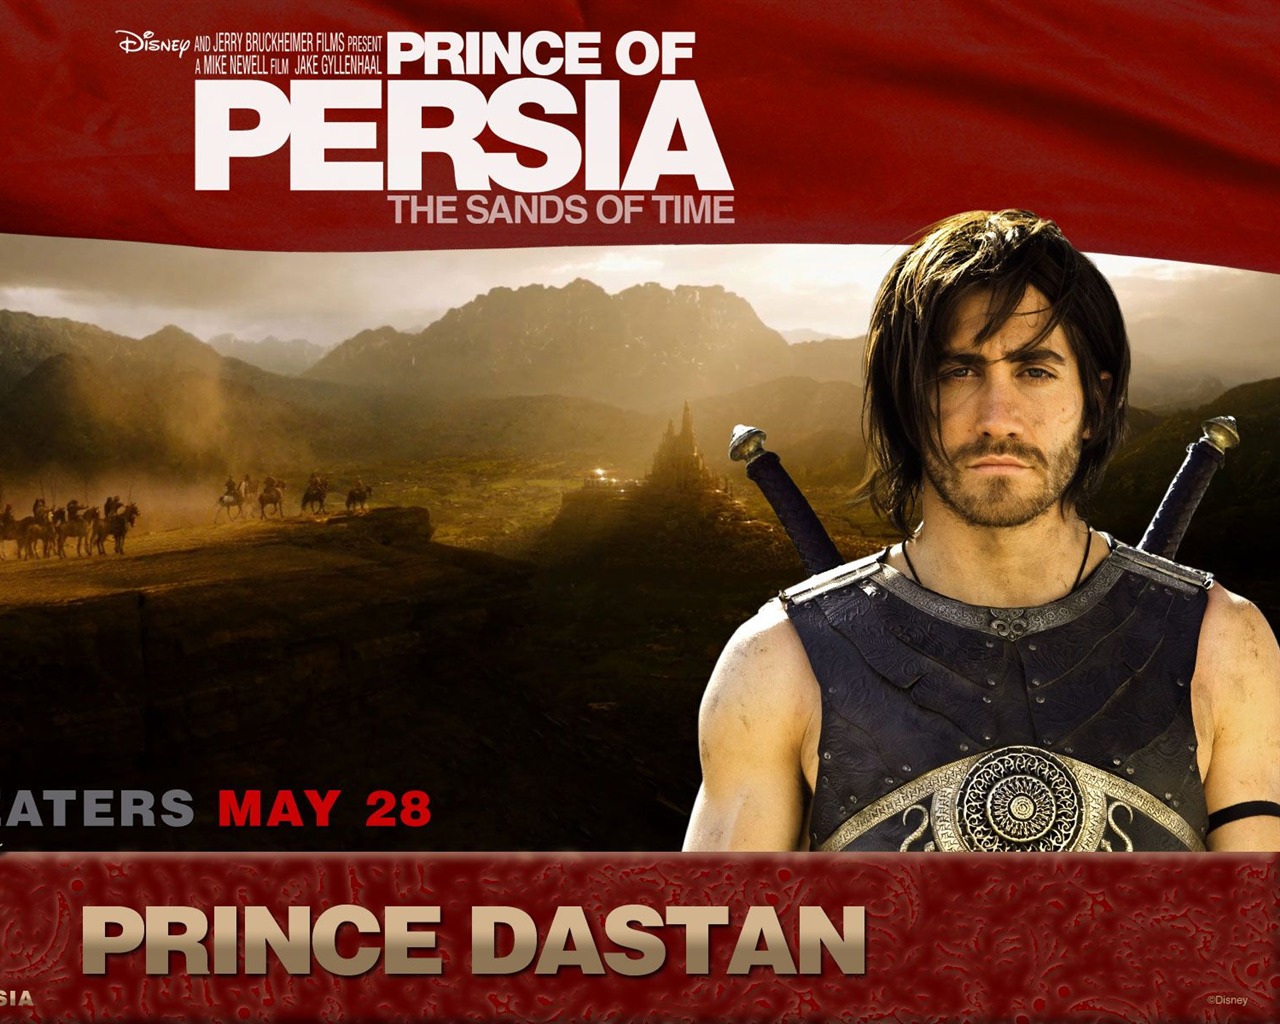 Prince of Persia The Sands of Time wallpaper #1 - 1280x1024